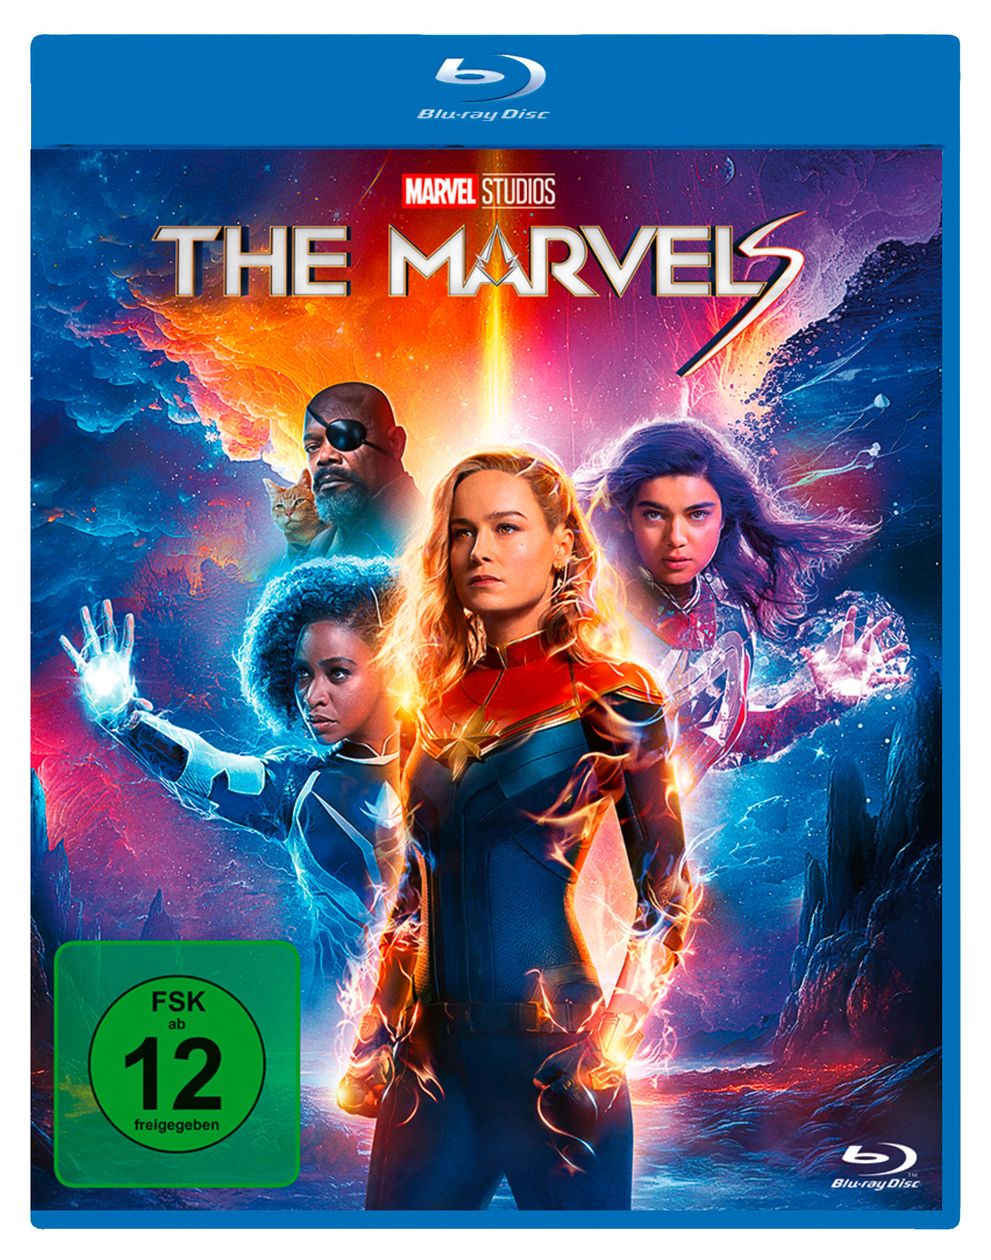 The Marvels (Blu-Ray) 